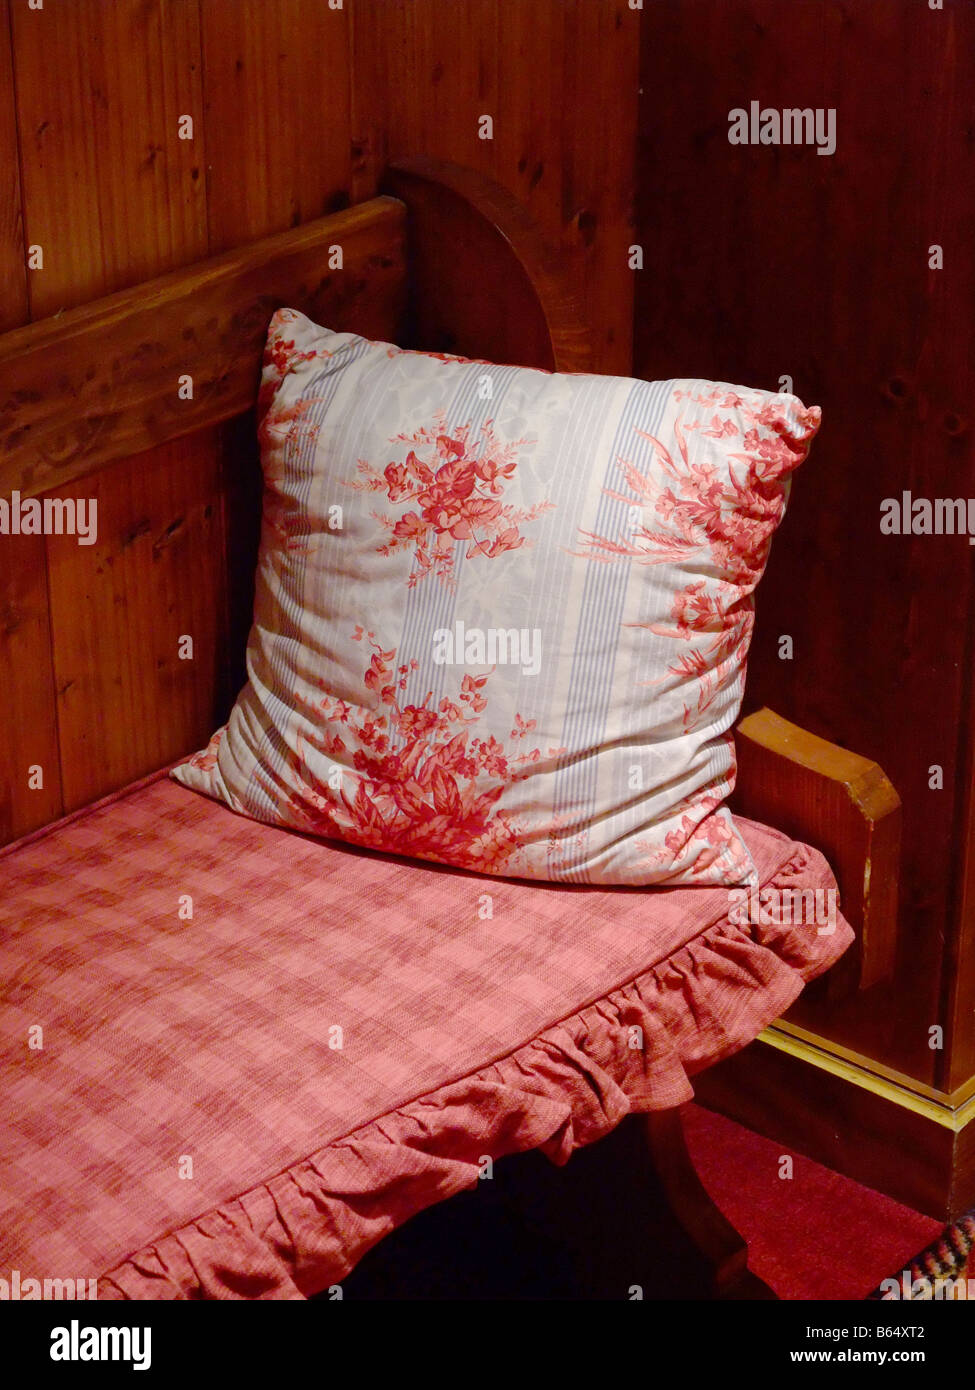 Red pillow kept on a wooden bench Stock Photo